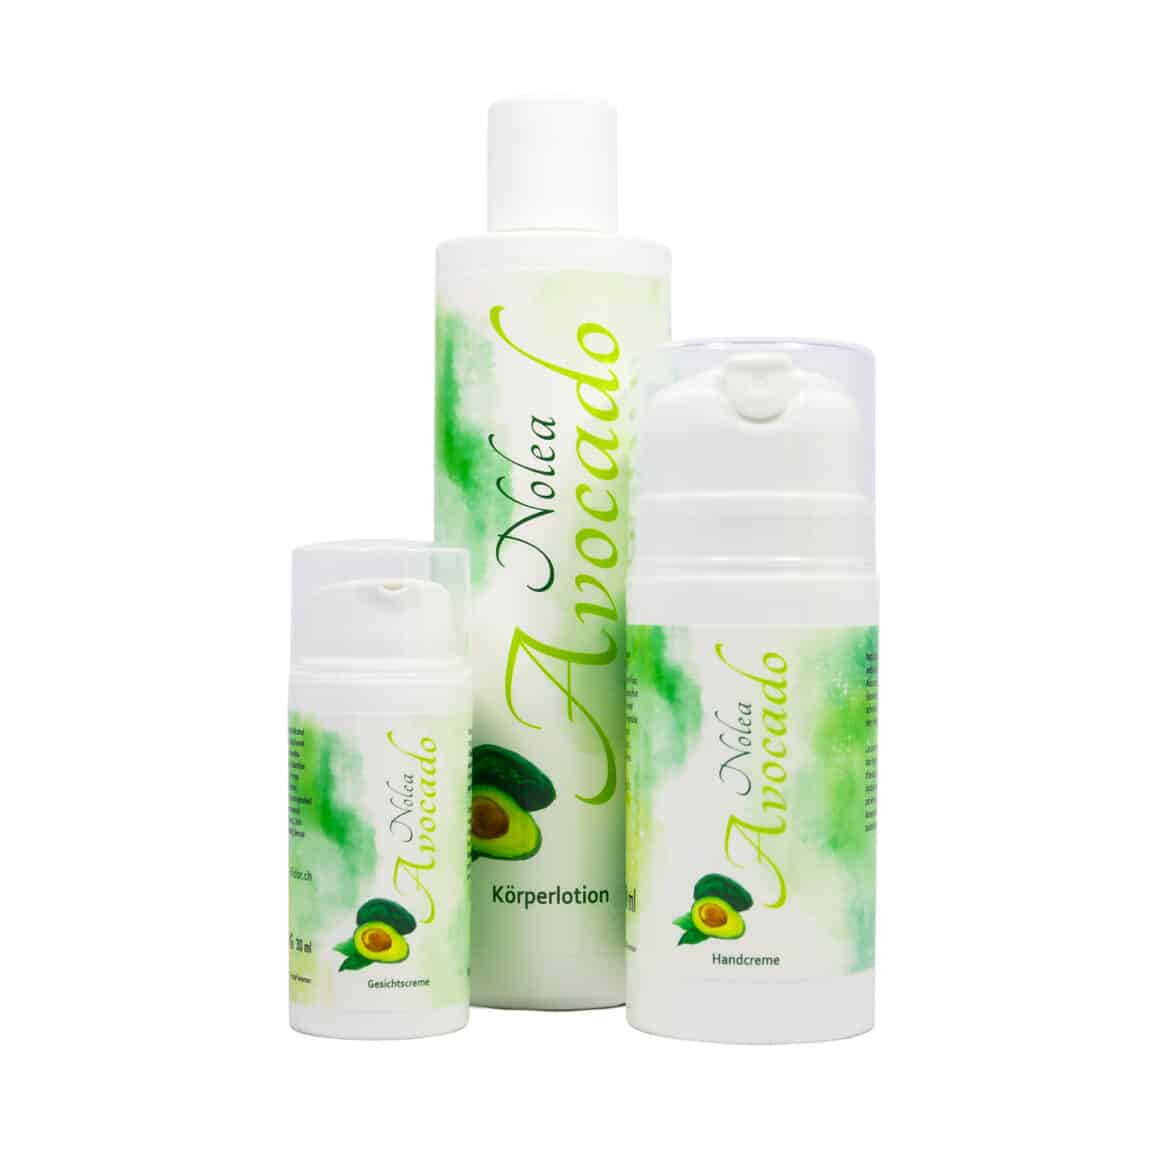 NOLEA Avocado product line, face cream, hand cream and body lotion. Natural cosmetics by Blidor AG.